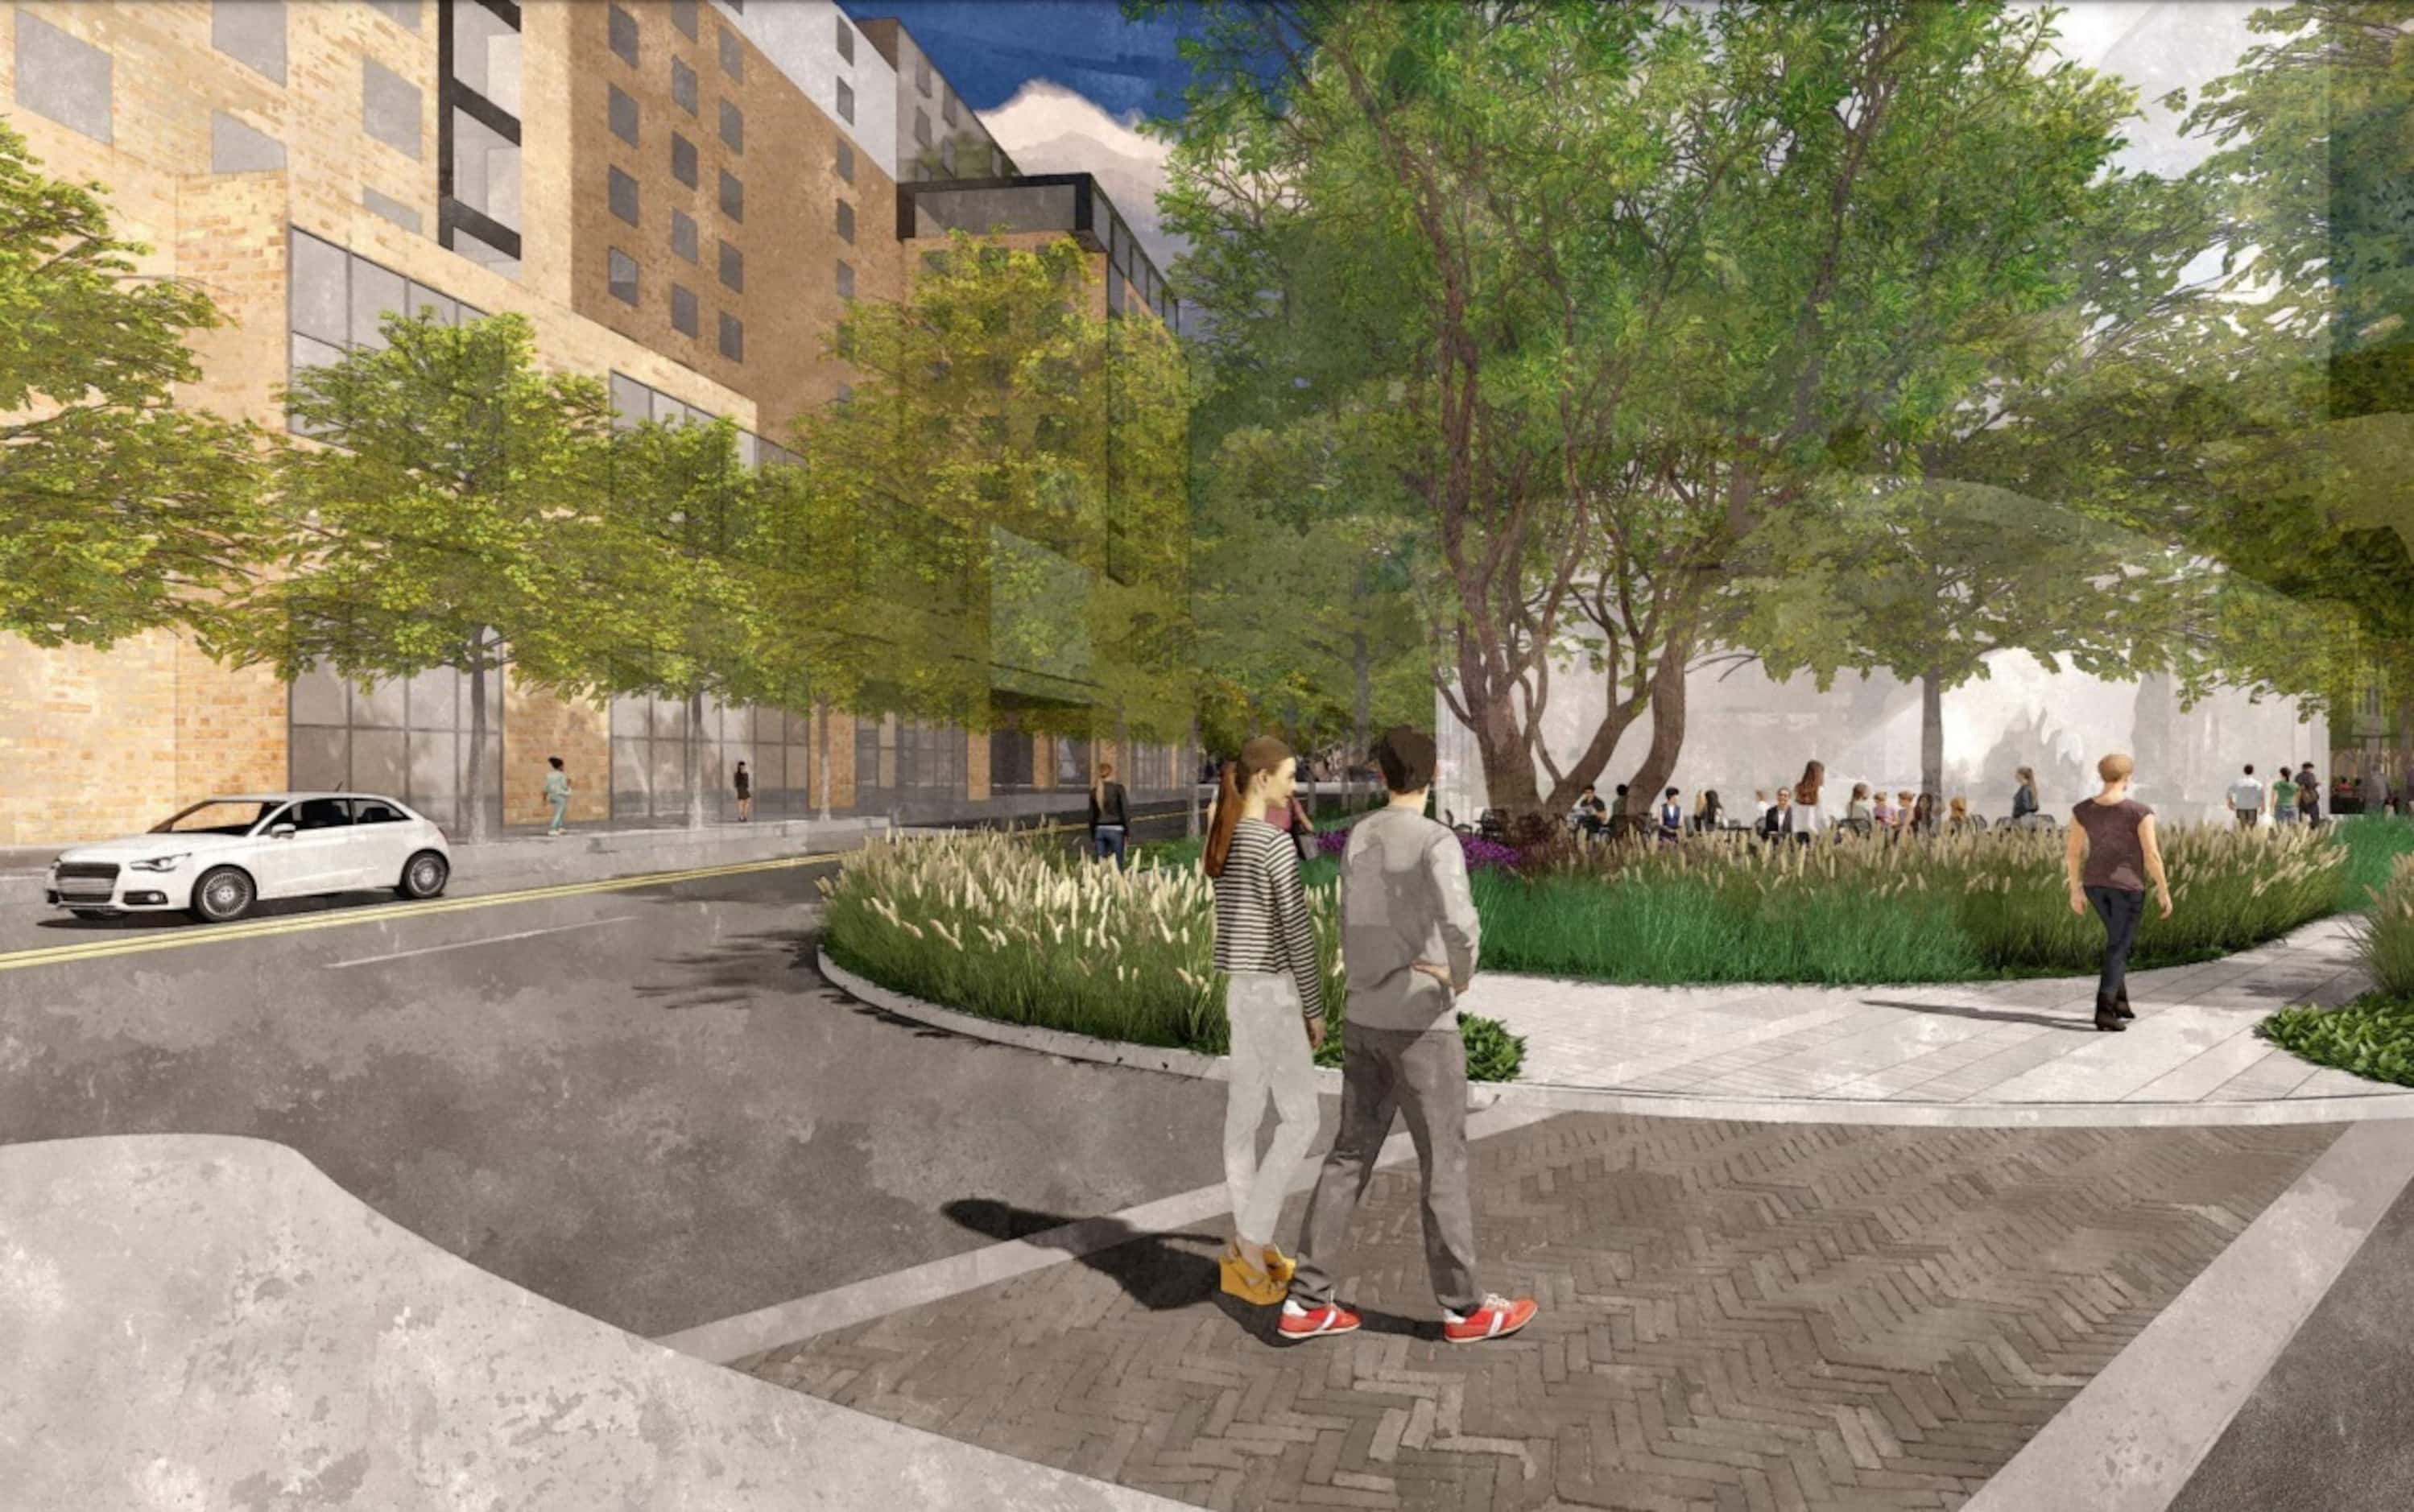 Widened sidewalks and thoughtful landscaping are other key elements to Crescent's approach...